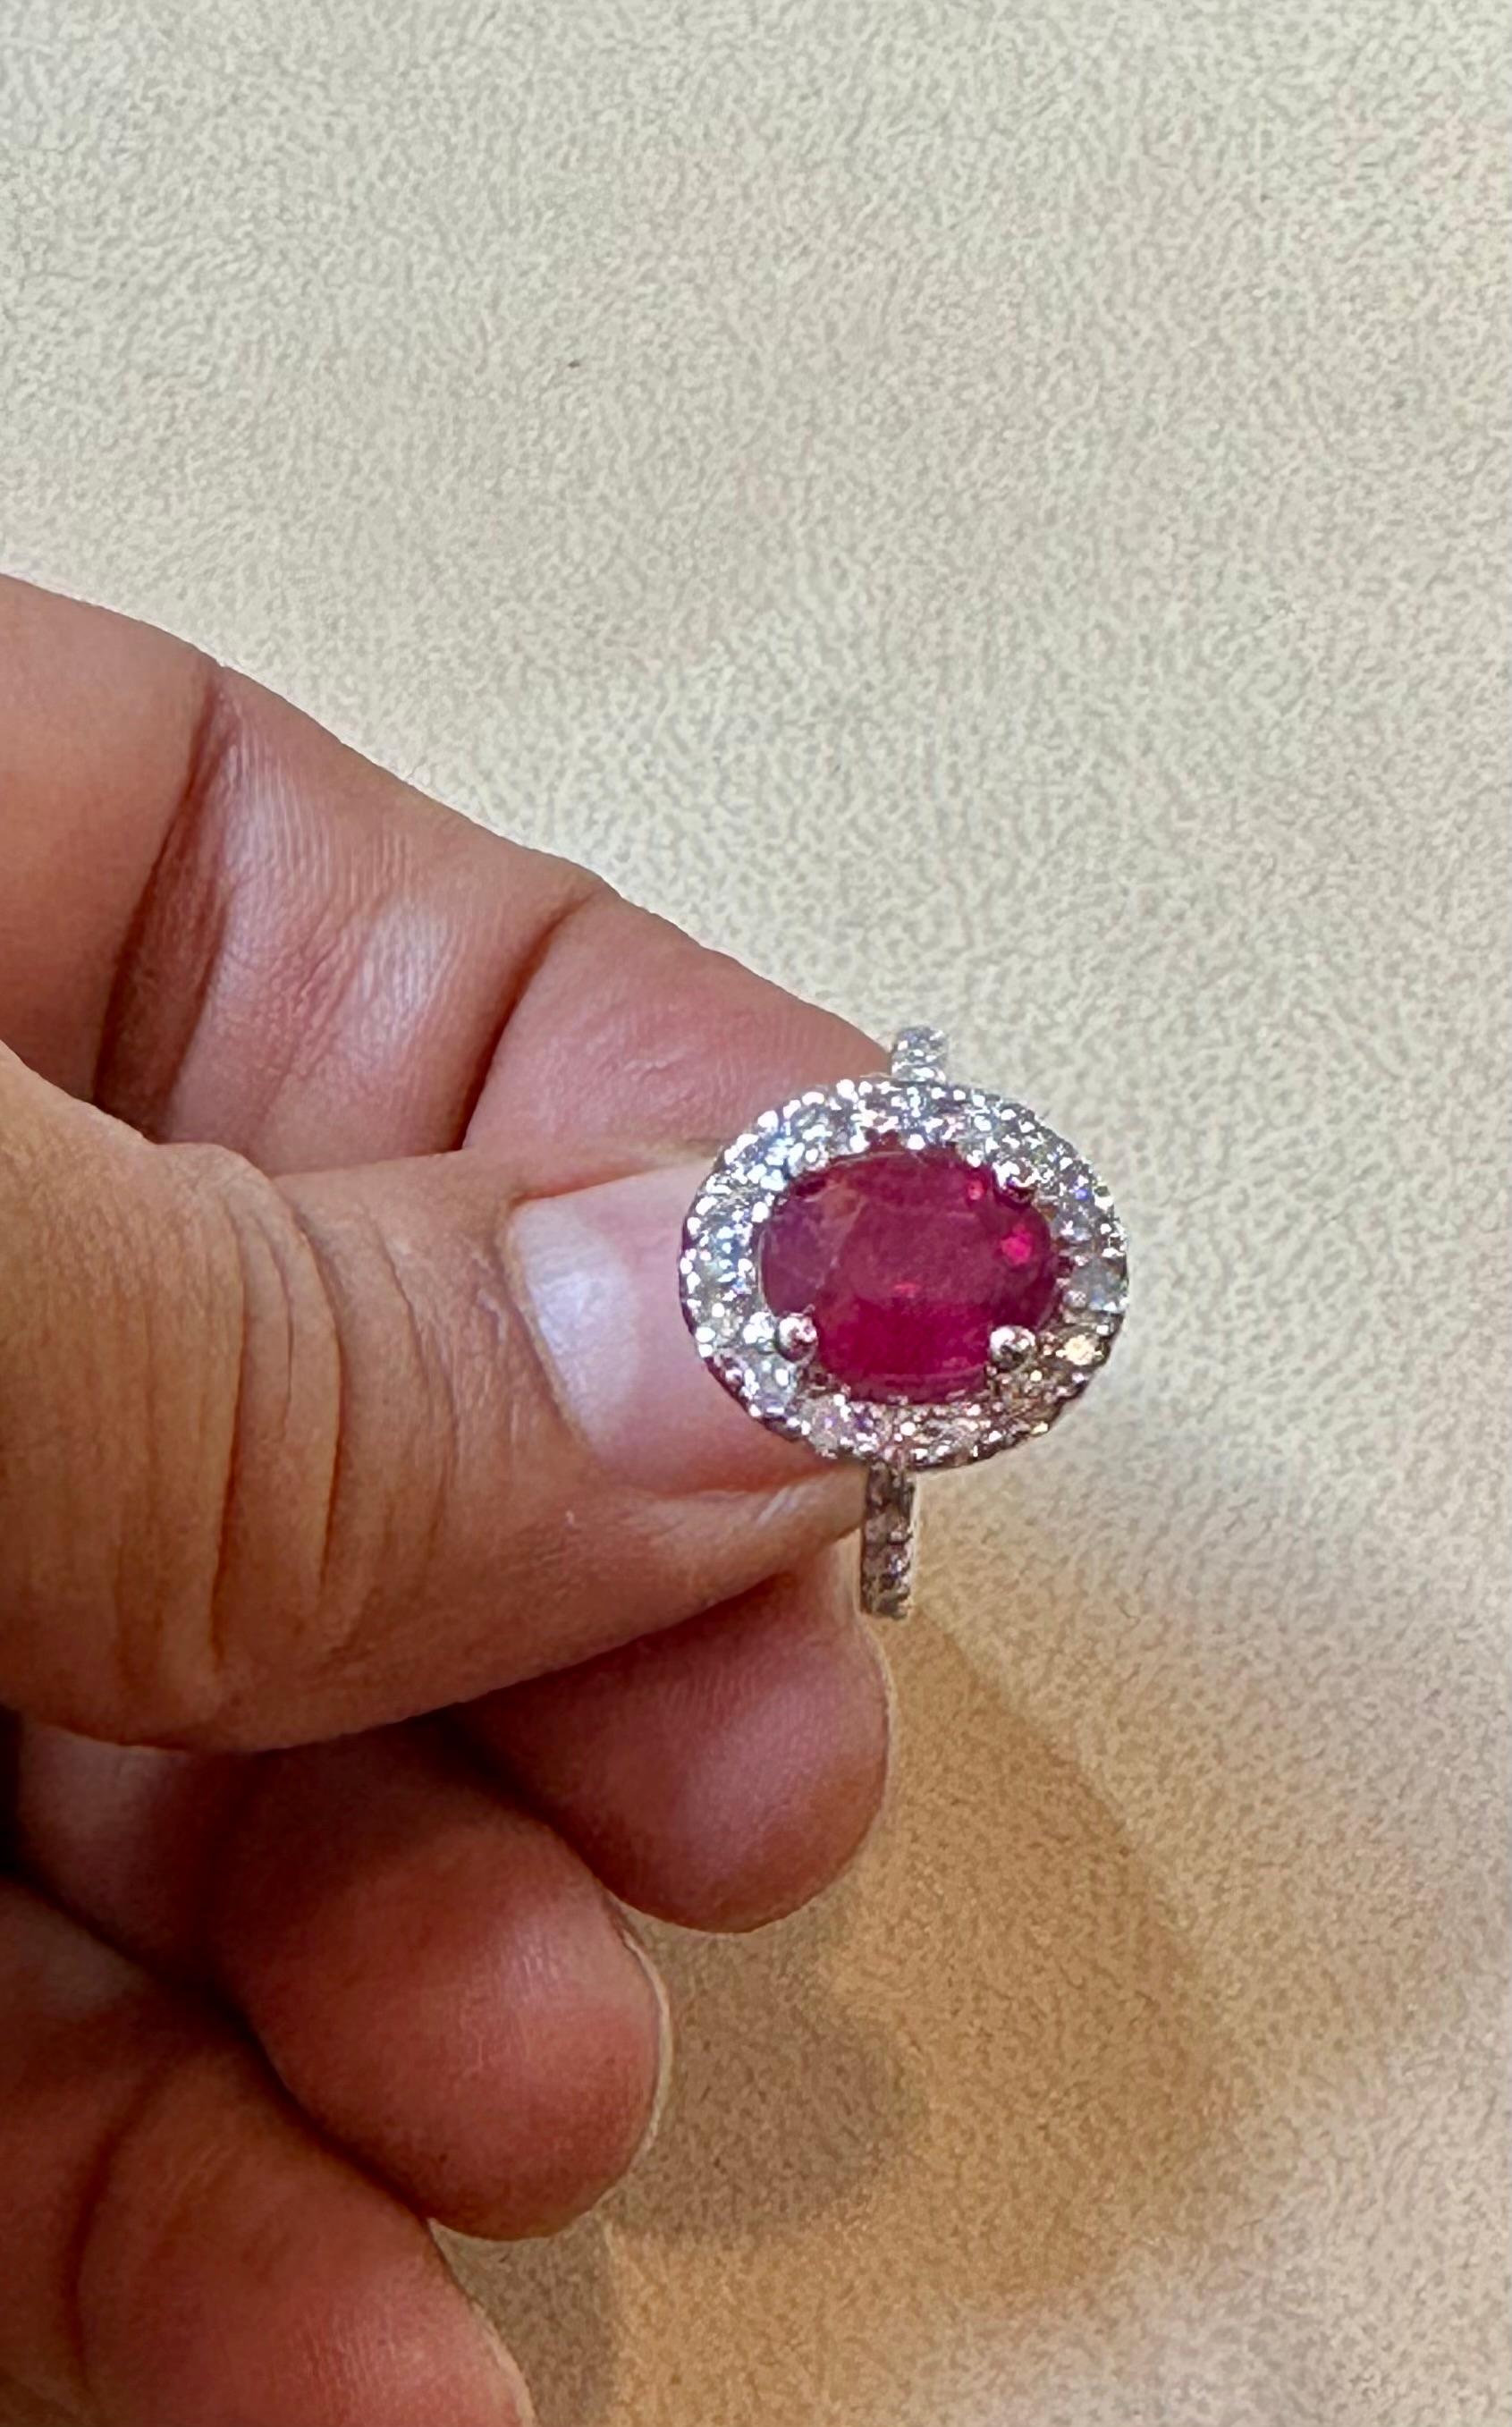 3 Carat Oval Treated Ruby & 1.25 ct Diamond Ring 14 Karat White Gold Size 6 For Sale 6